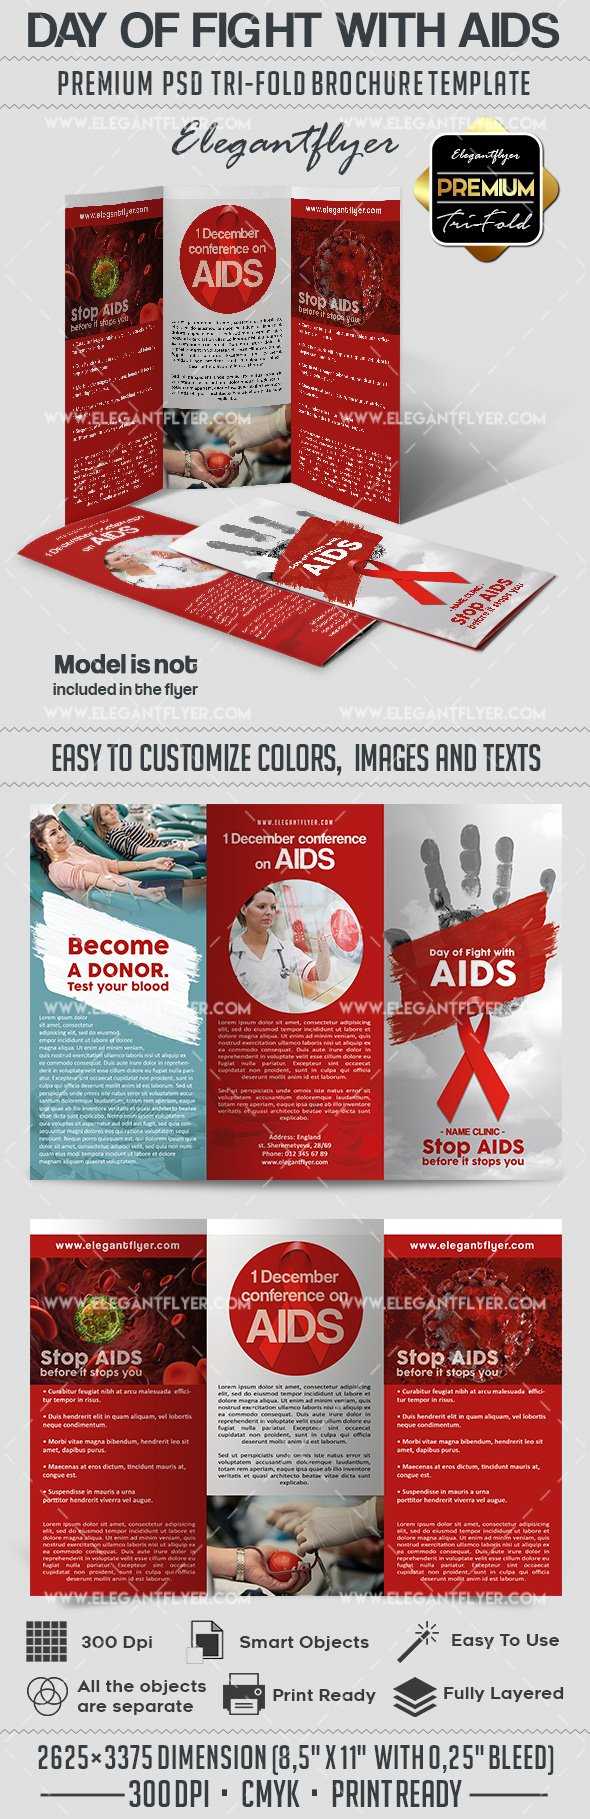 Day Of Fight With Aids Psd Brochure In Hiv Aids Brochure Templates